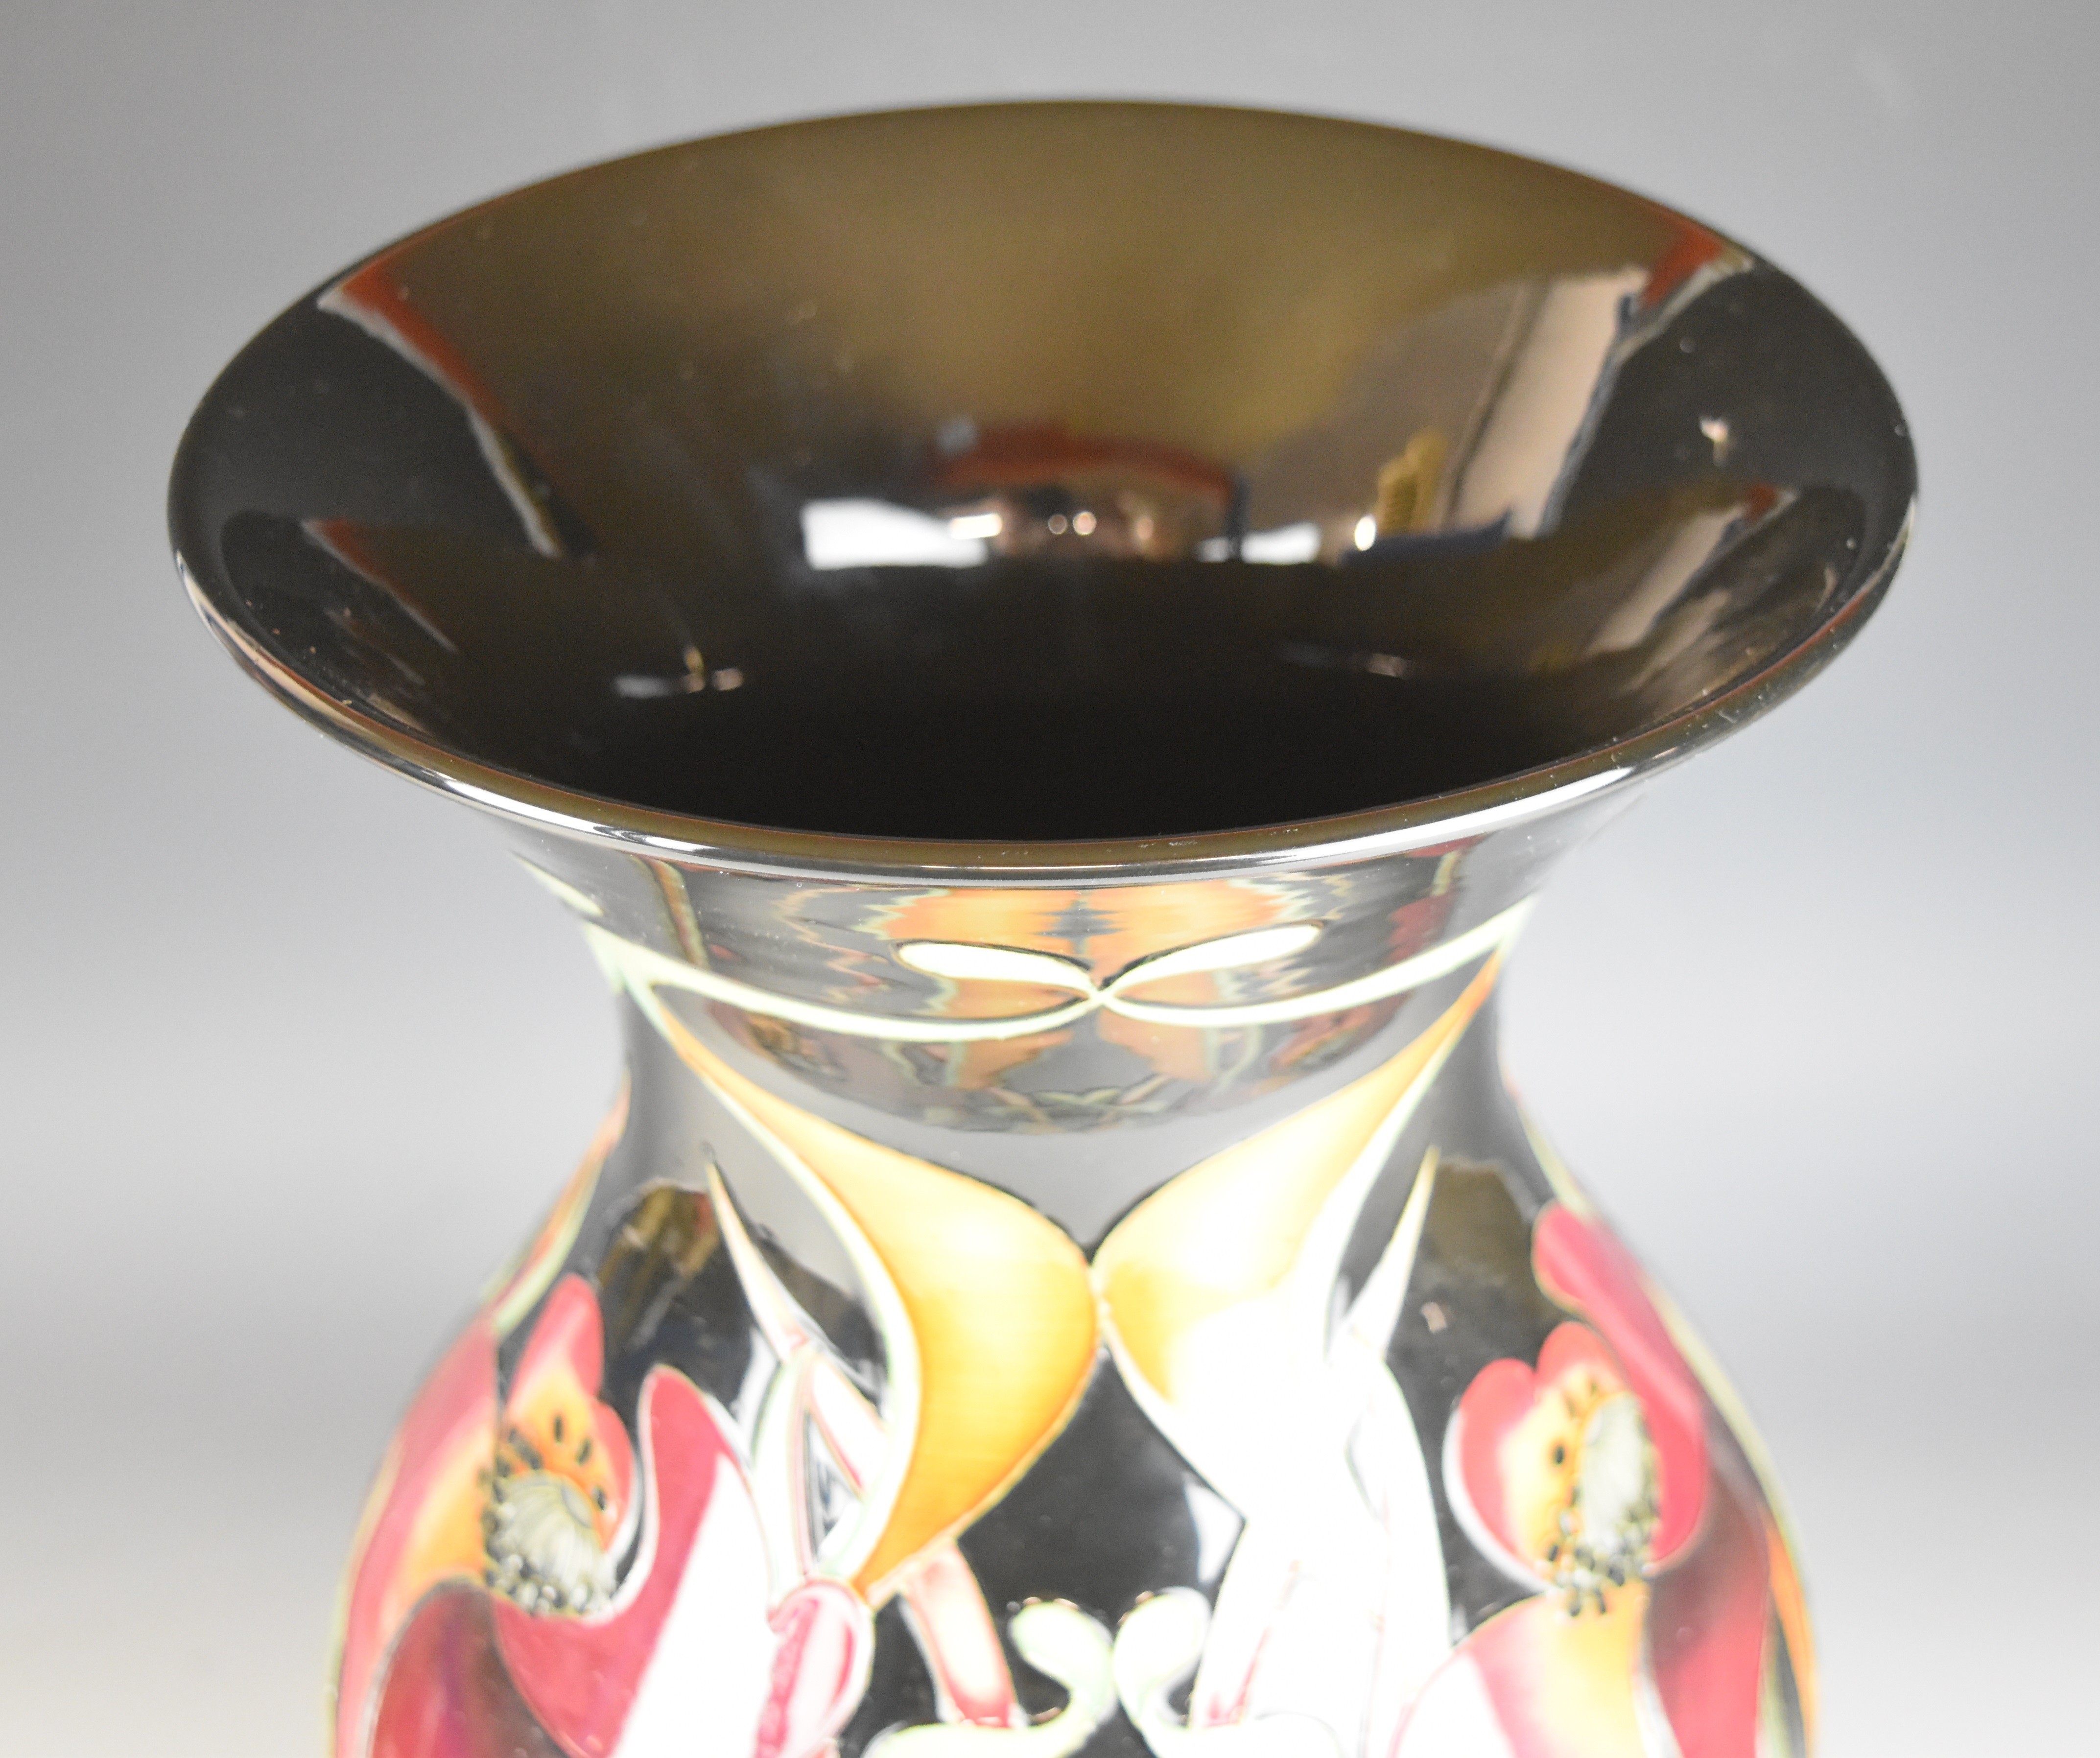 Moorcroft prestige vase 'In Praise of Poppies' with 'Trial 22-7-11' to base and label stating - Image 3 of 12